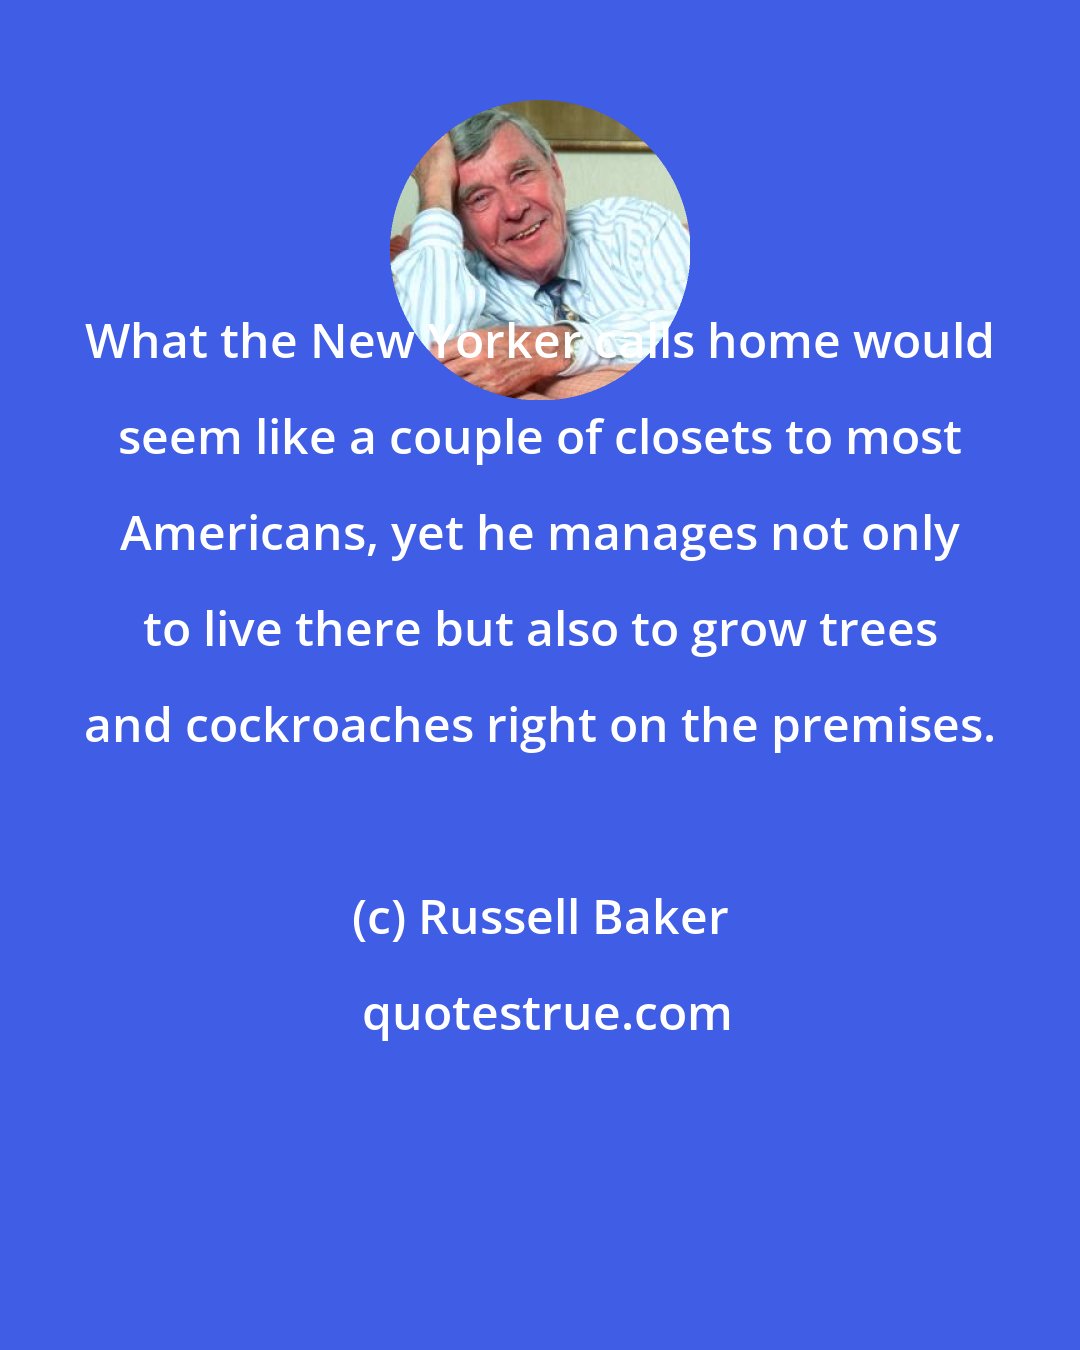 Russell Baker: What the New Yorker calls home would seem like a couple of closets to most Americans, yet he manages not only to live there but also to grow trees and cockroaches right on the premises.